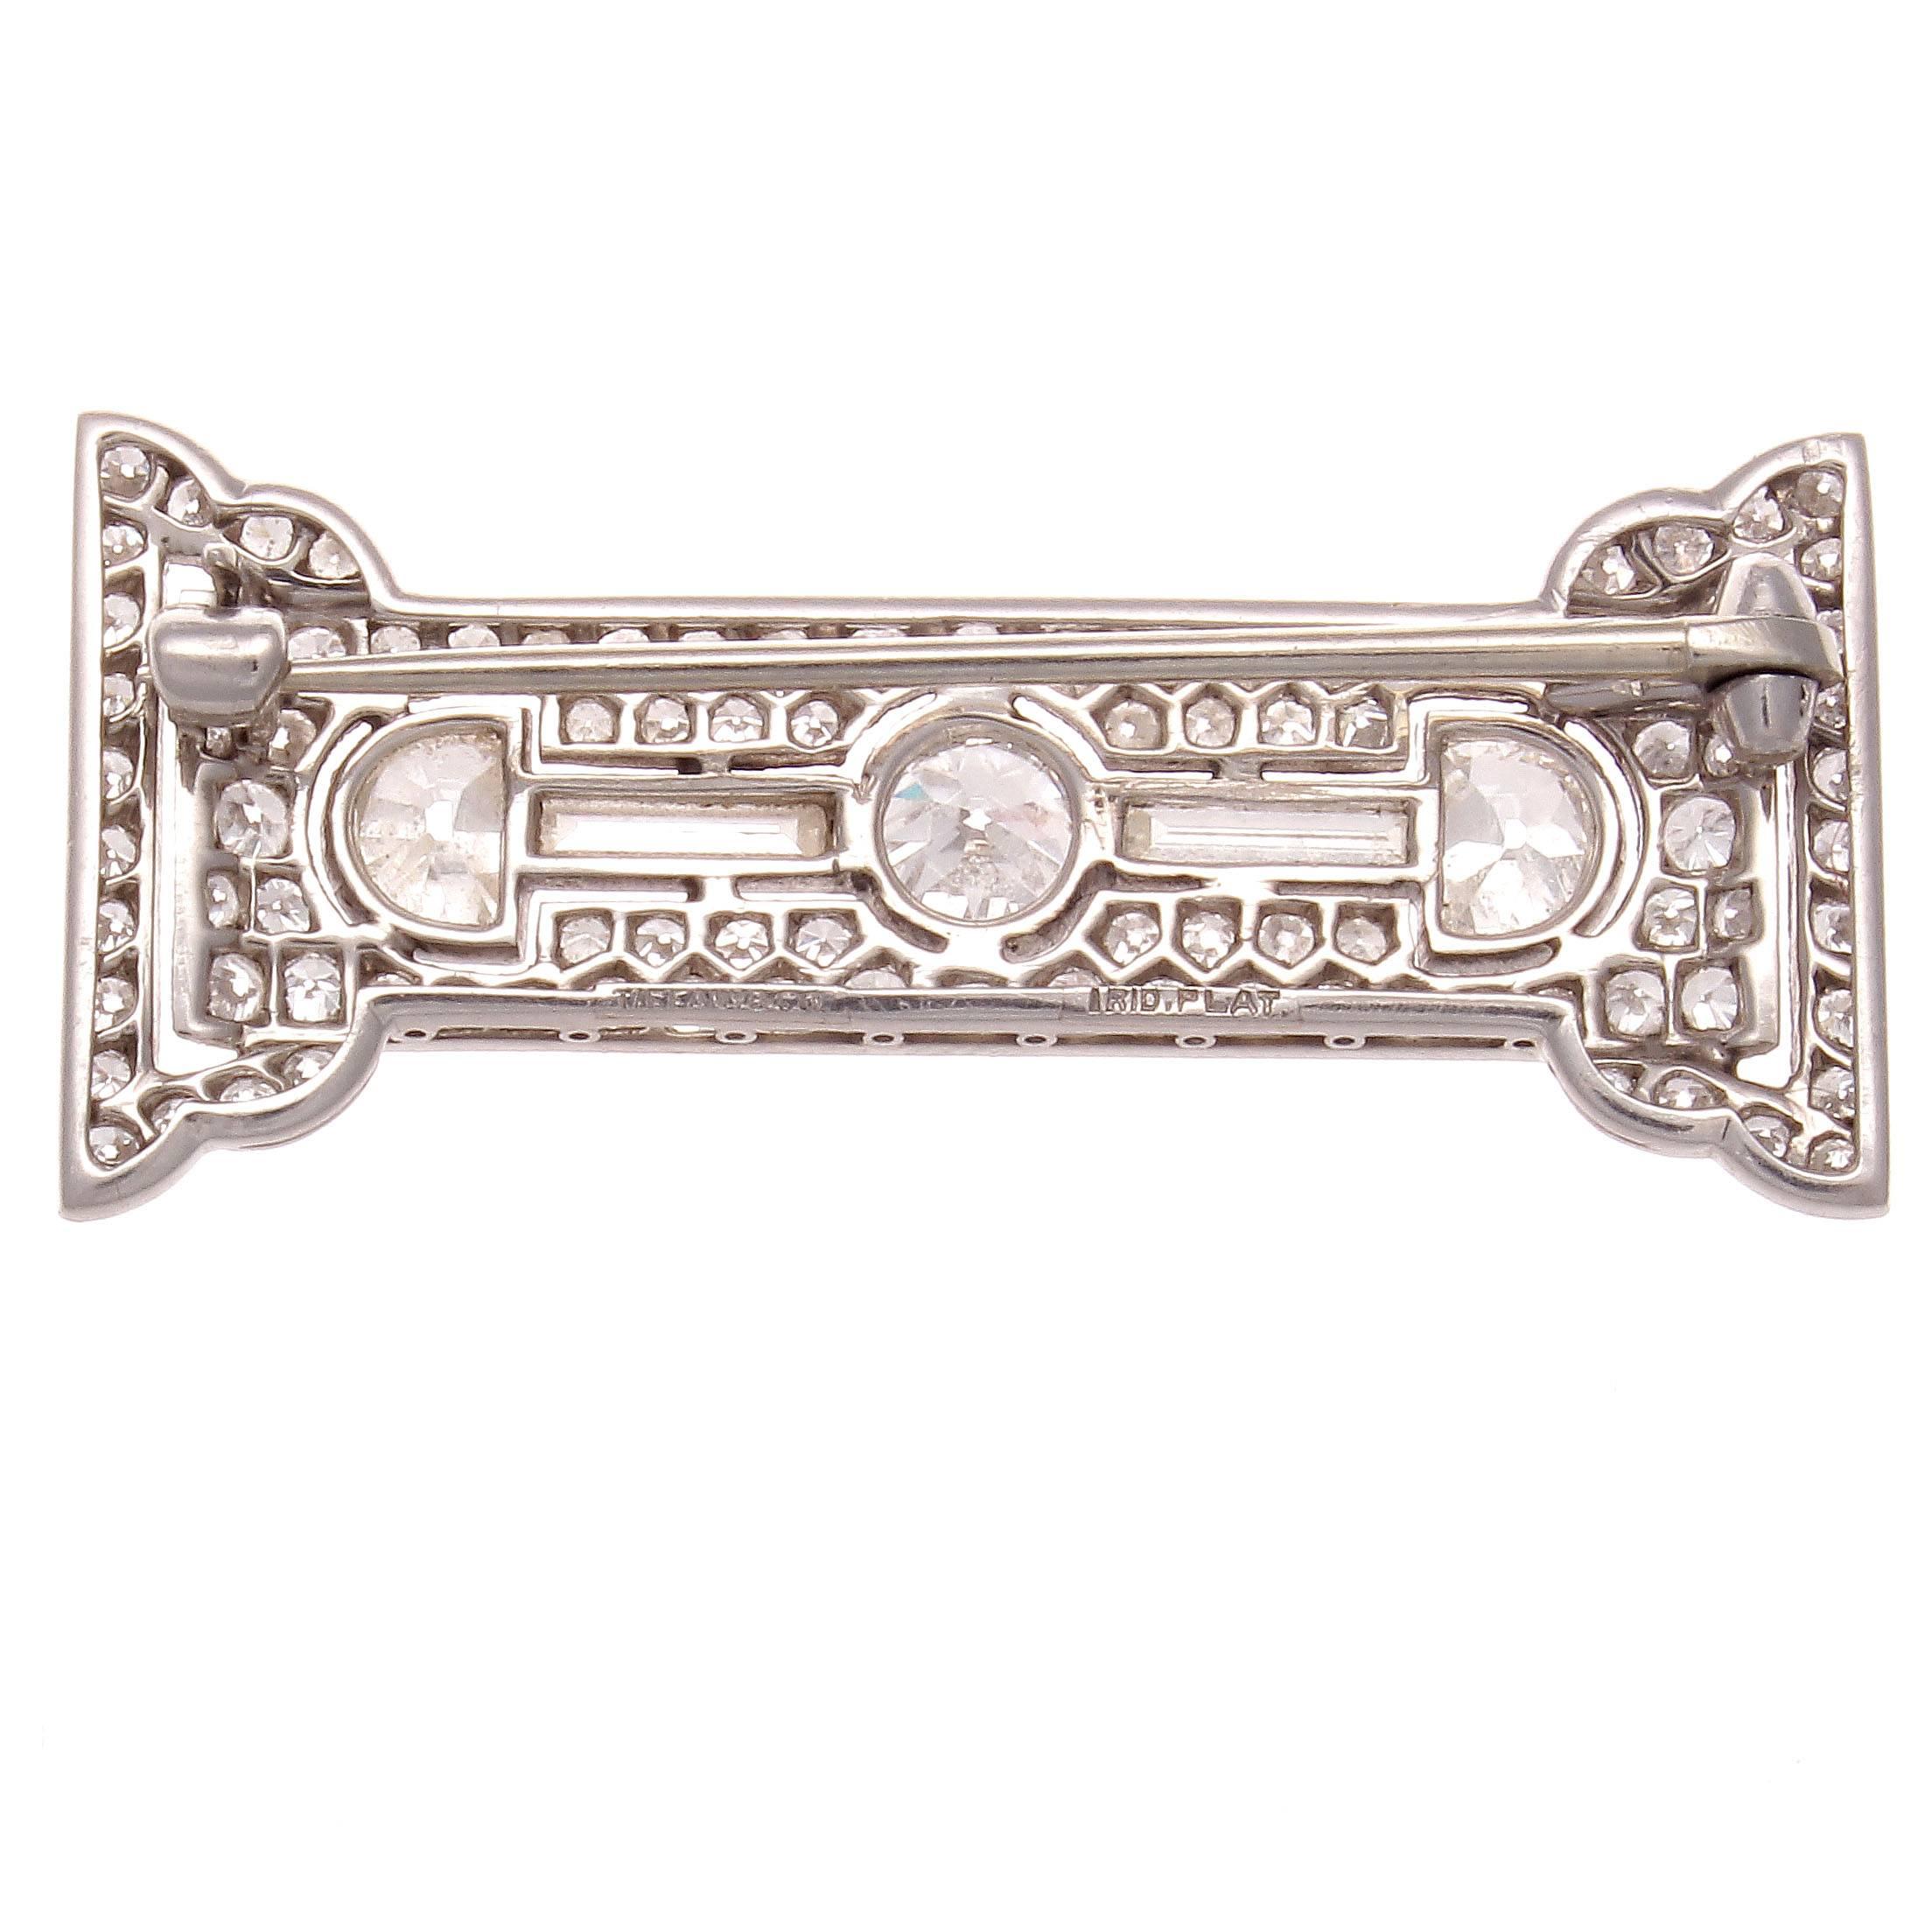 Always expressing the spirit of the times through superior design, Tiffany has captured the extravagance of the 1920's in this brooch. 

Featuring a mix of geometric shapes from round old European, baguette and half moon cut diamonds to create this